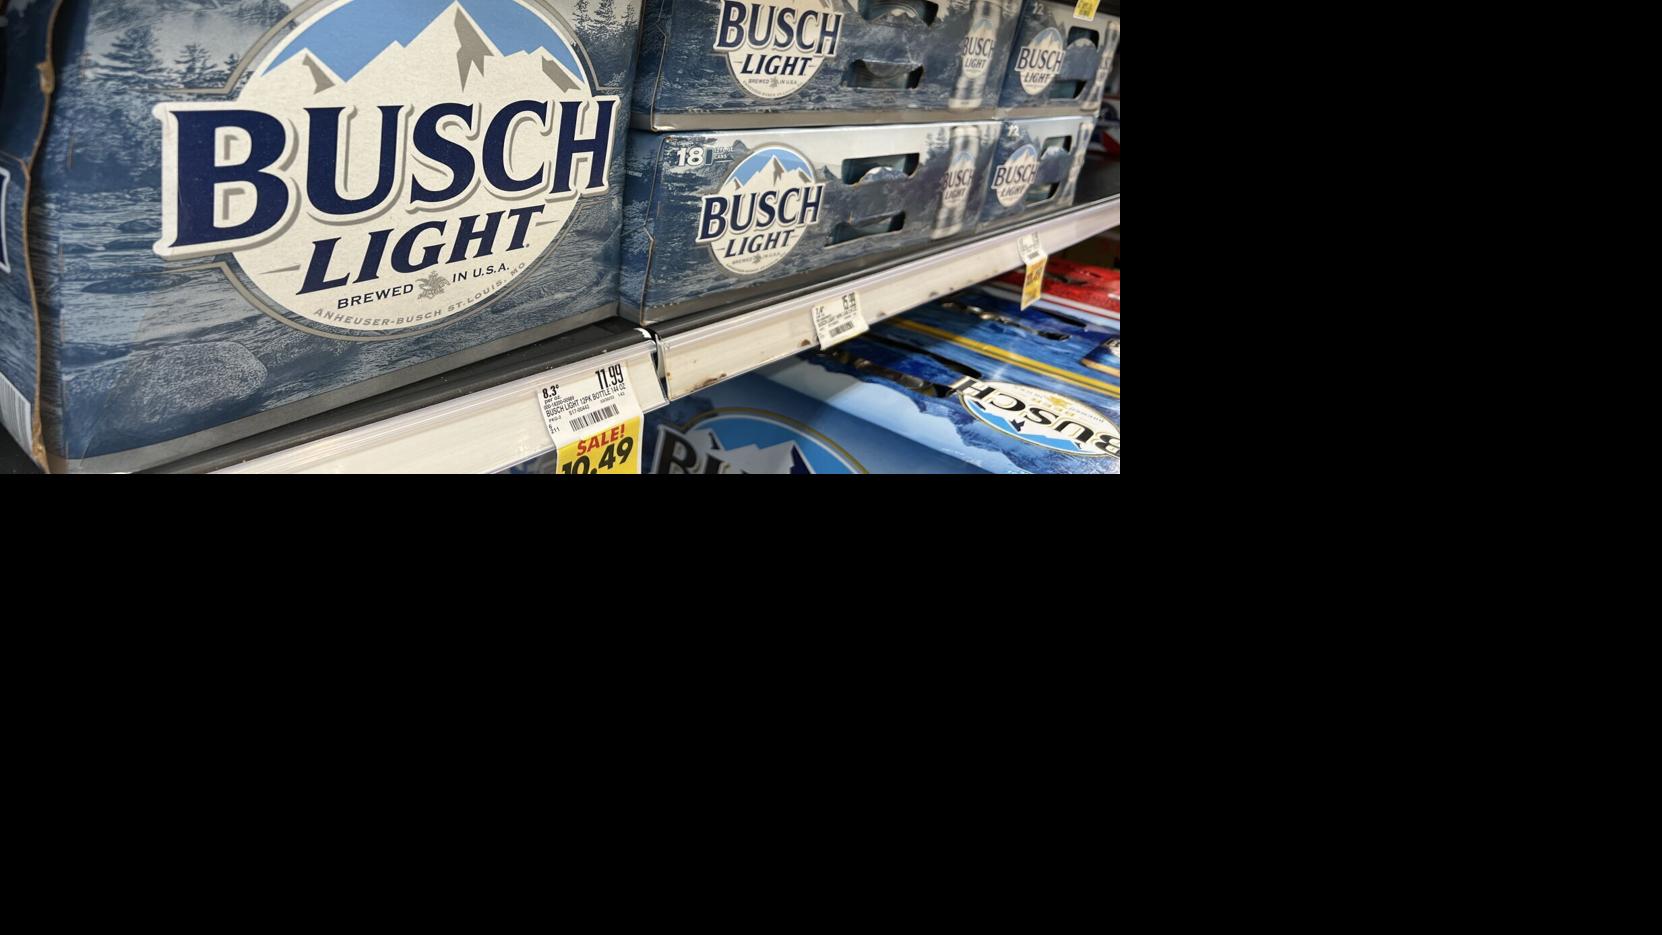 Busch Light is flying off shelves right now. Why?